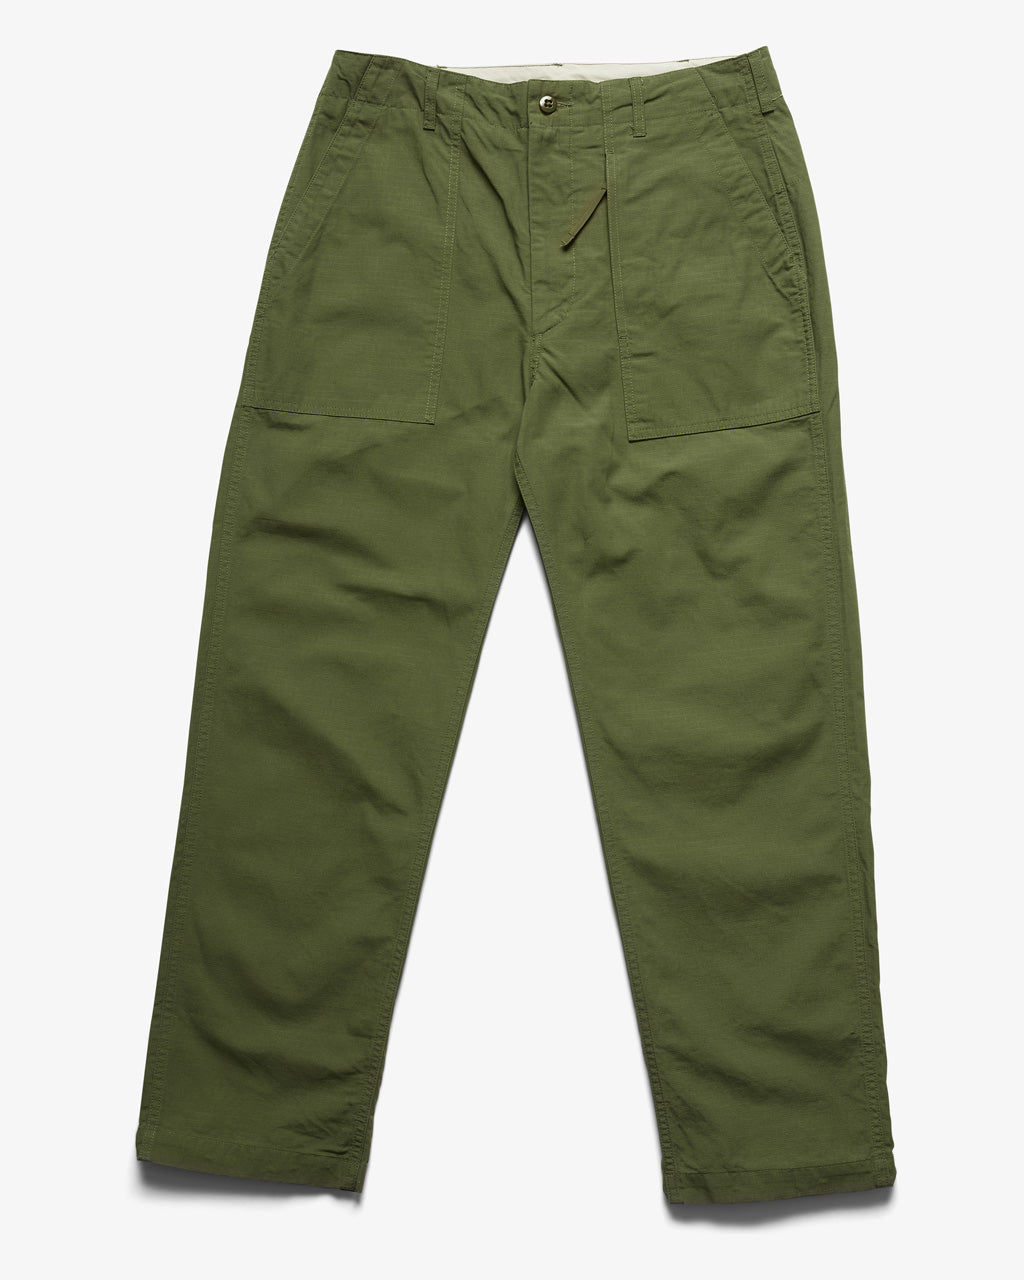 ENGINEERED GARMENTS   FATIGUE PANT OLIVE COTTON RIPSTOP   Supply